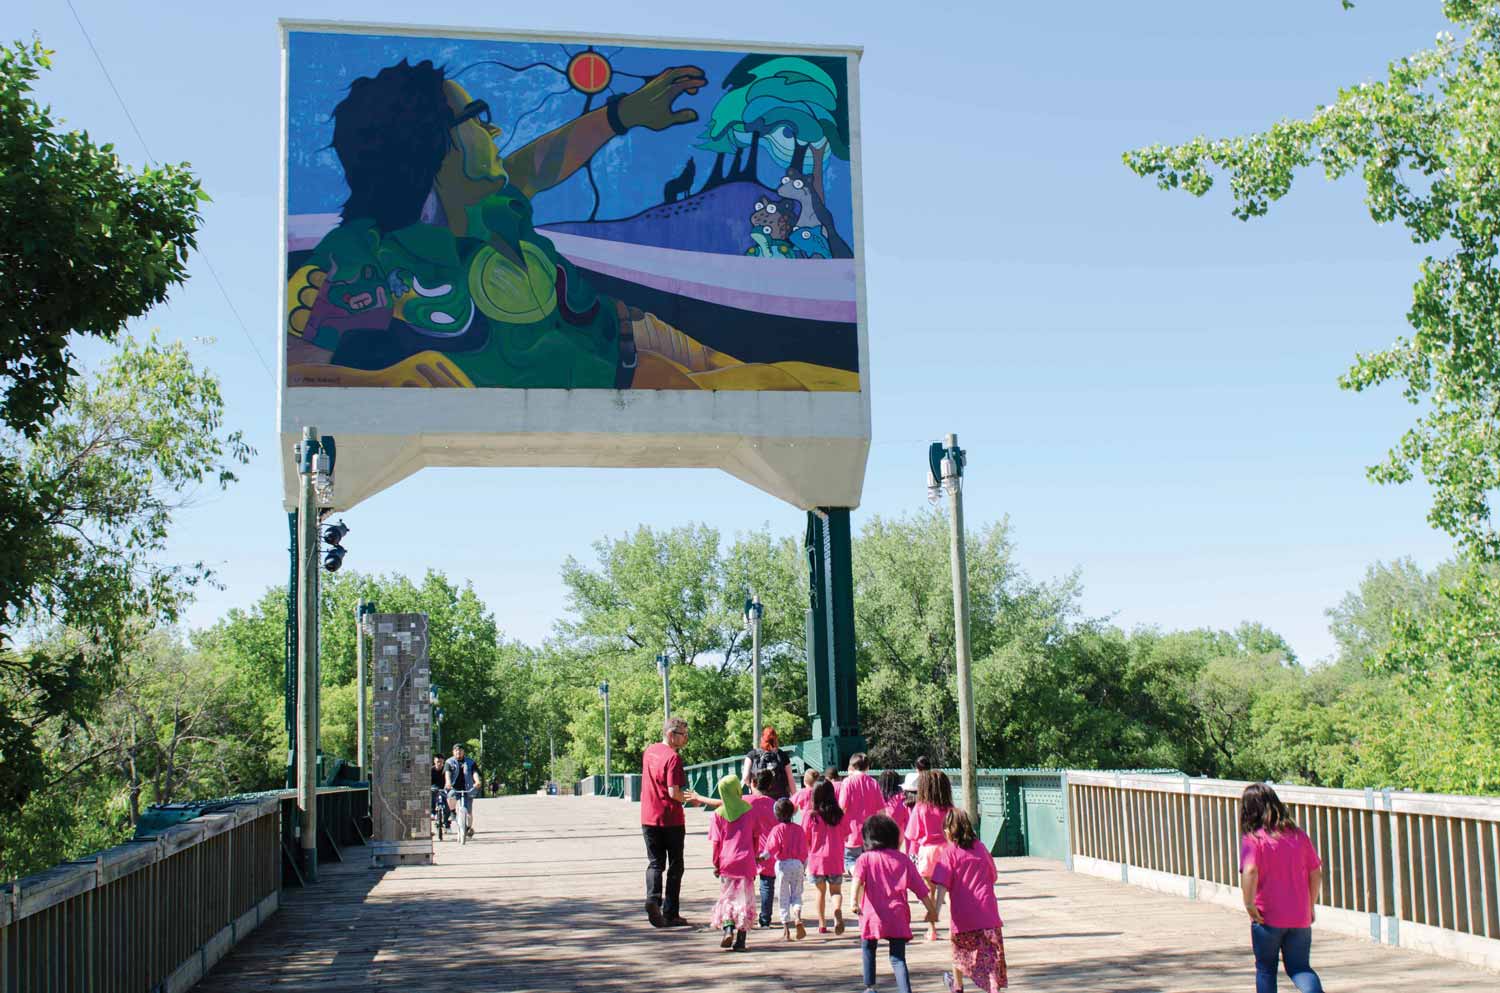 The rehabilitated Rail Bridge in summer 2015. On the counterweight is a colourful mural by Aboriginal artist Mike Valcourt. A group of young girls wearing pink shirts are being led across by a few adults.